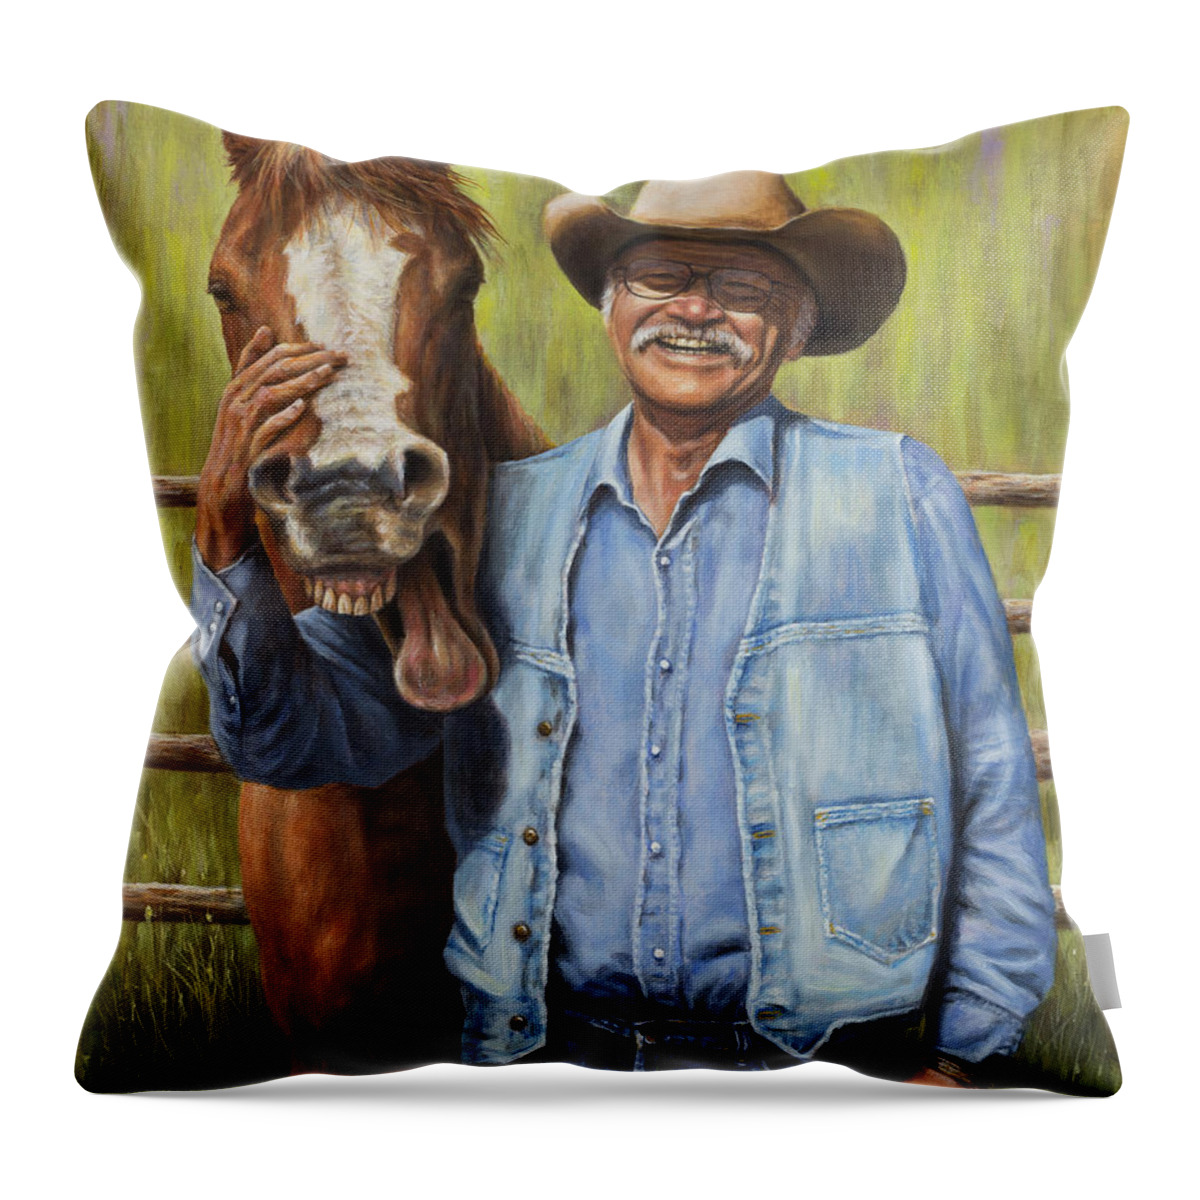 Cowboy Throw Pillow featuring the painting Horsin' Around by Kim Lockman